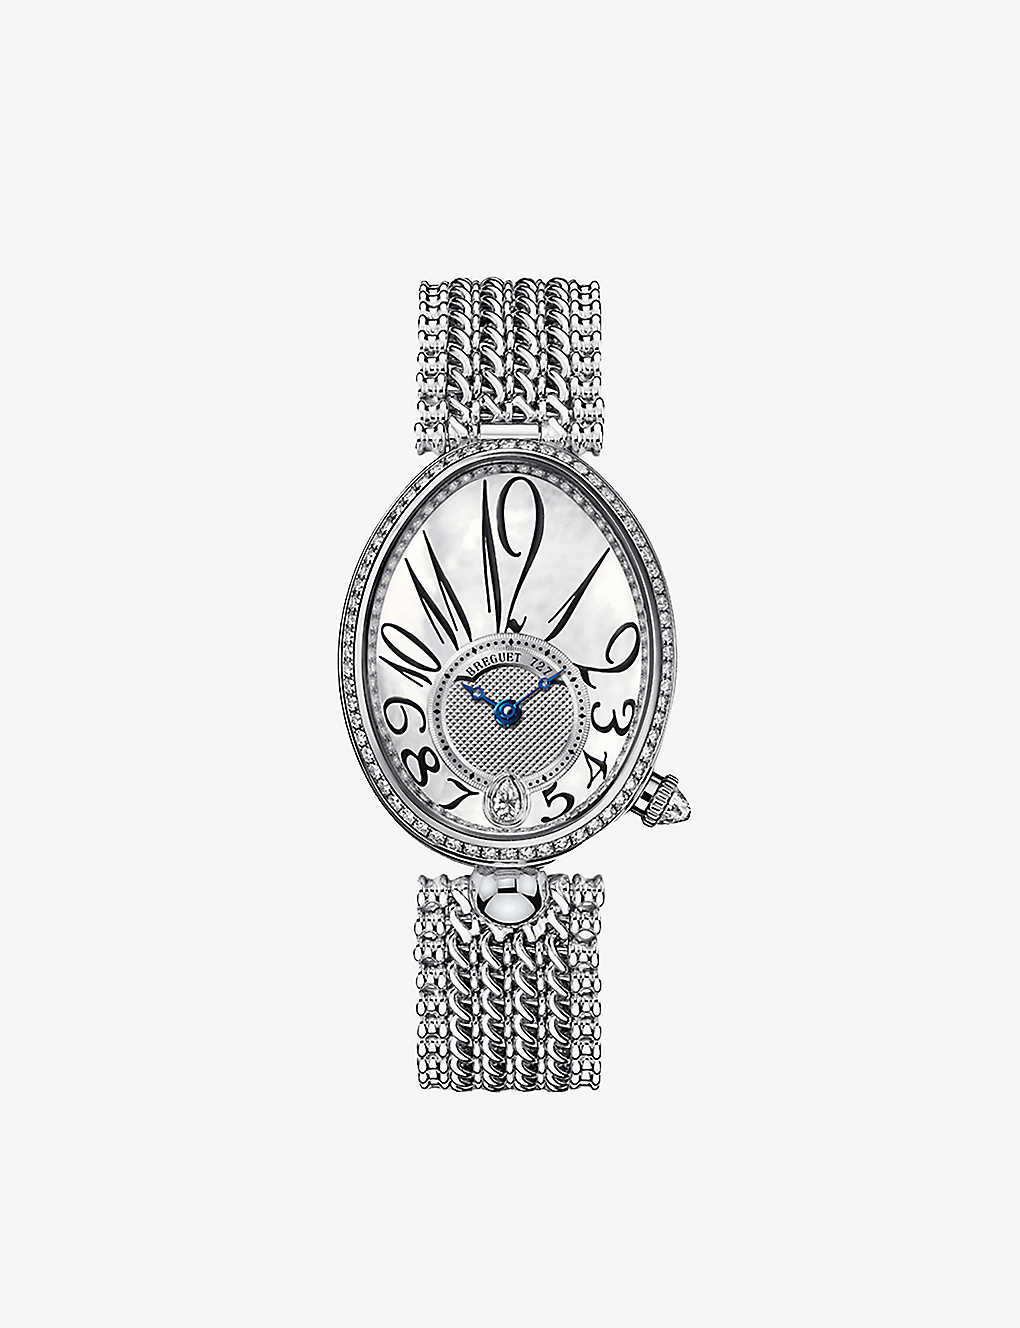 Breguet Womens 18ct White Gold 8918bb/58/j20/d000 Queen Of Naples 18ct White-gold, Diamond And Mothe